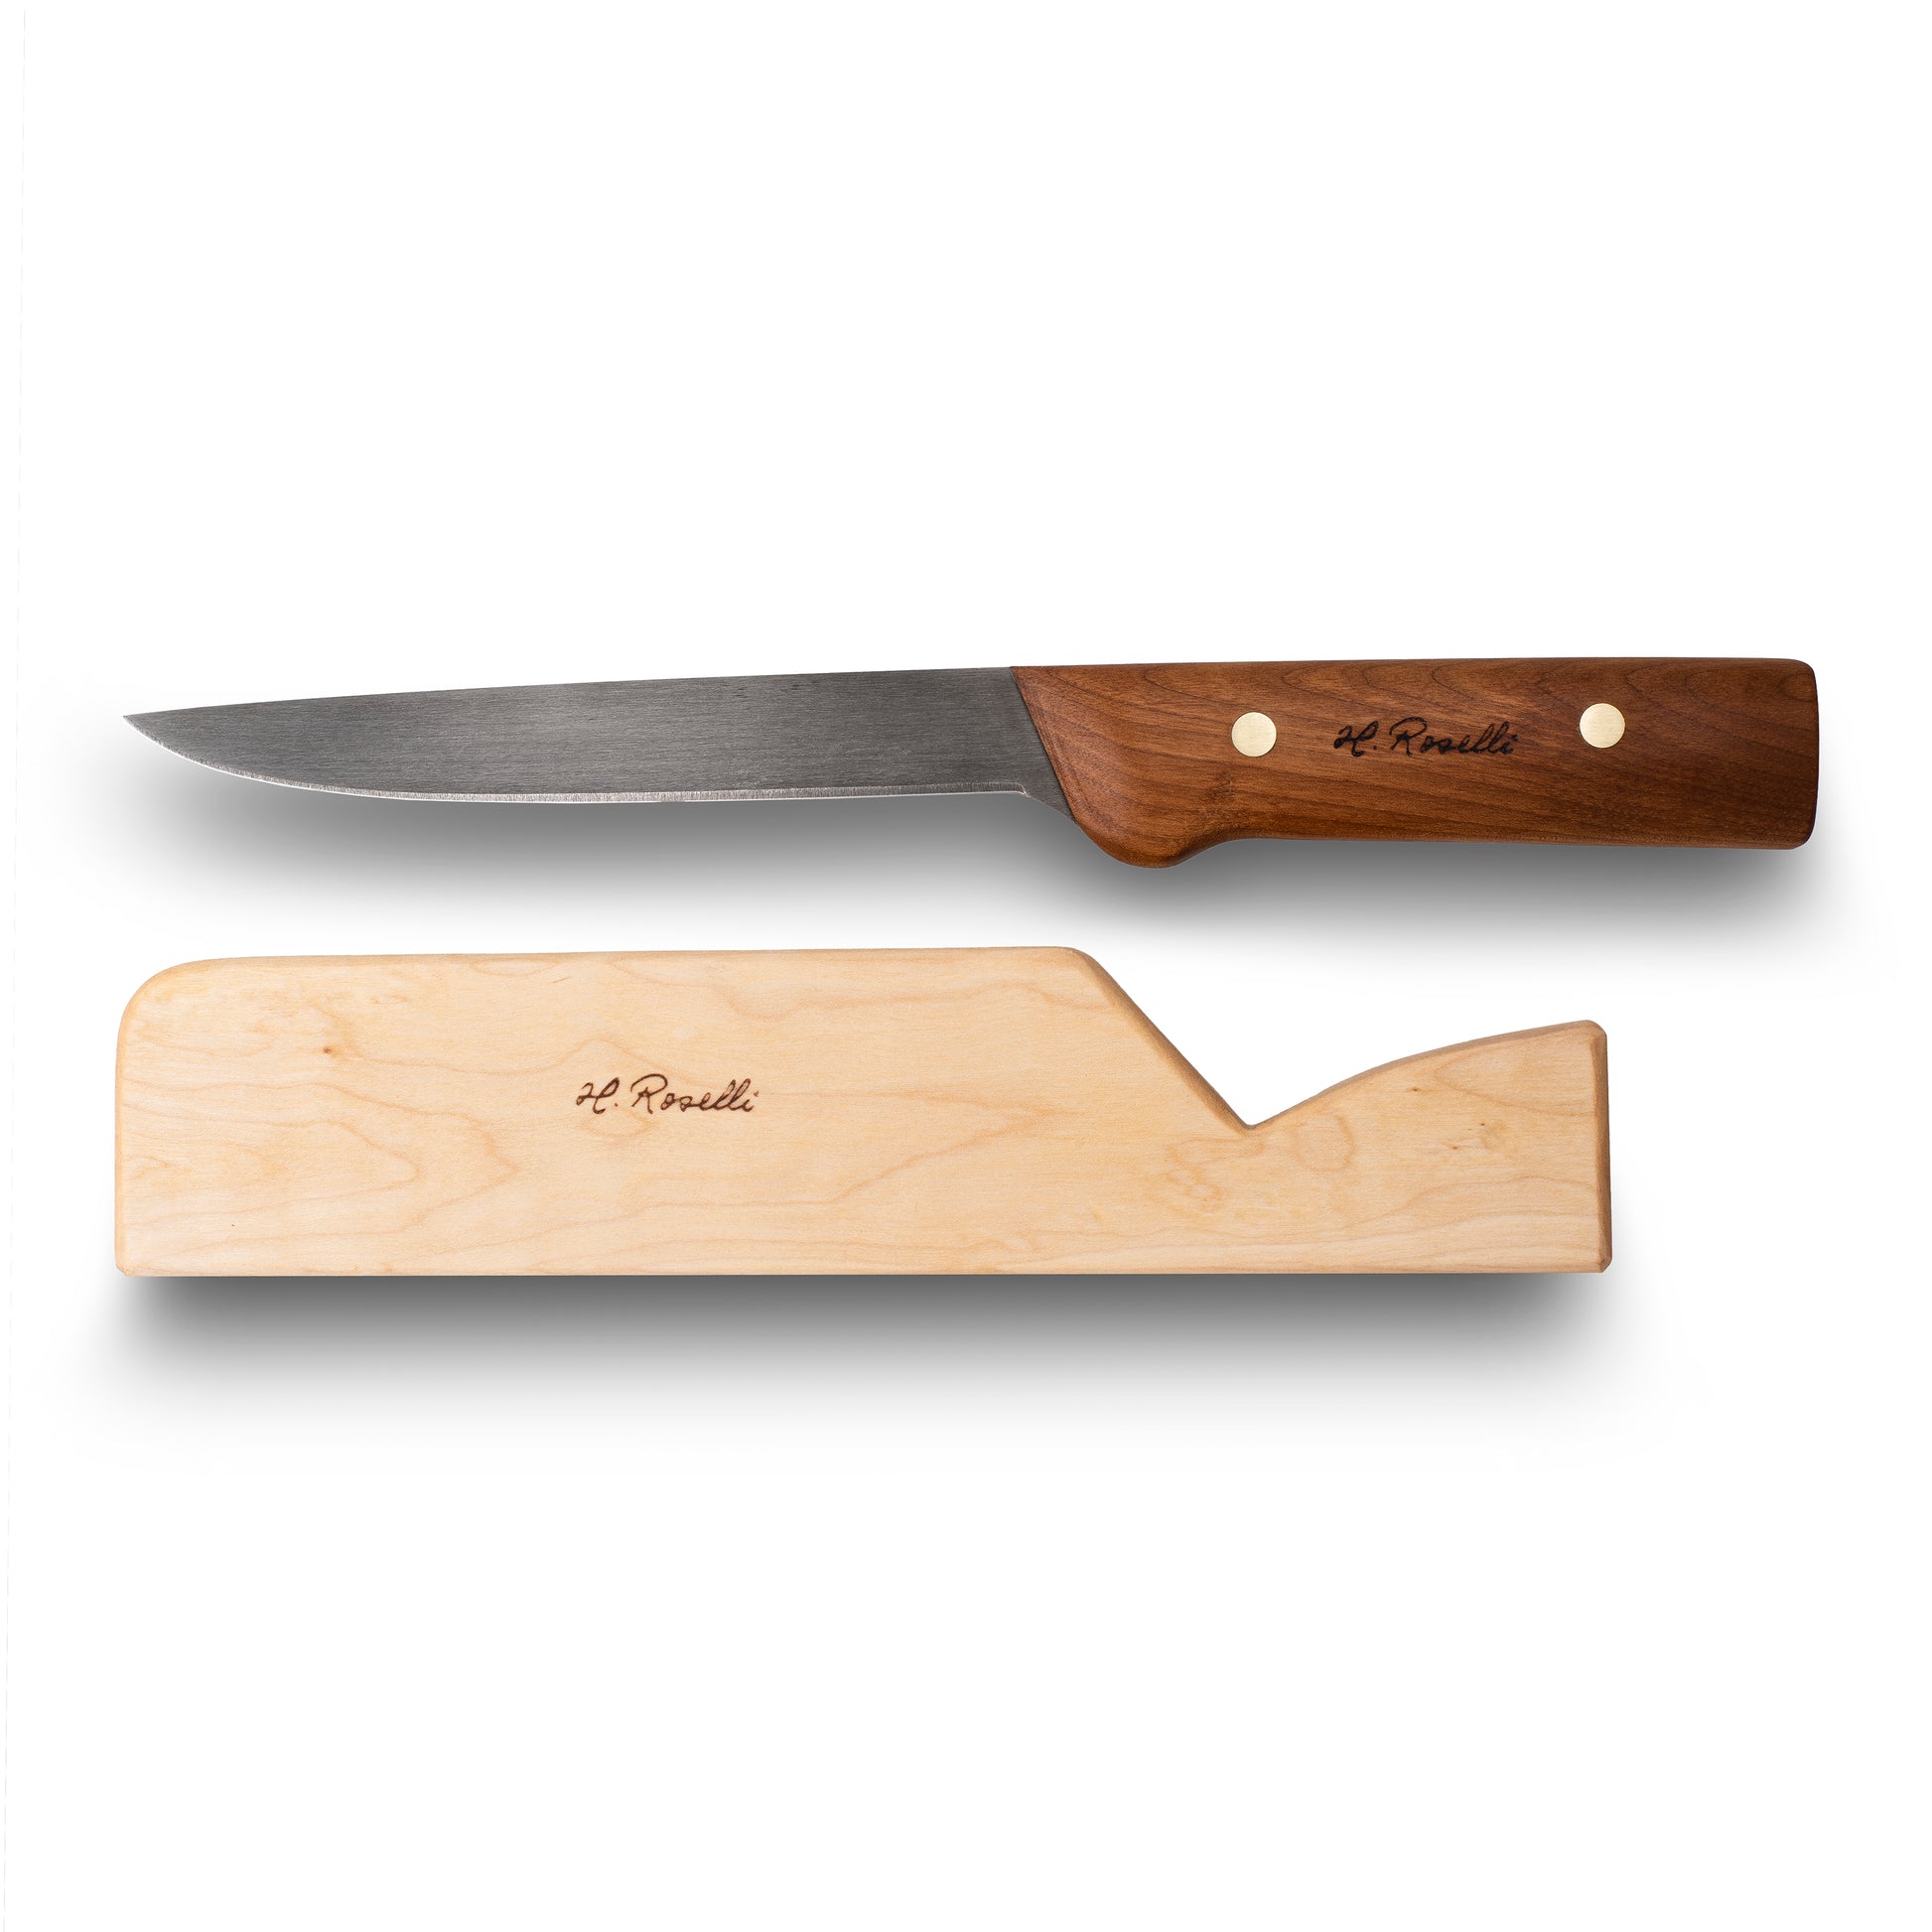 Roselli UHC Fillet Kitchen Knife Culinary Tool Kitchen Knife